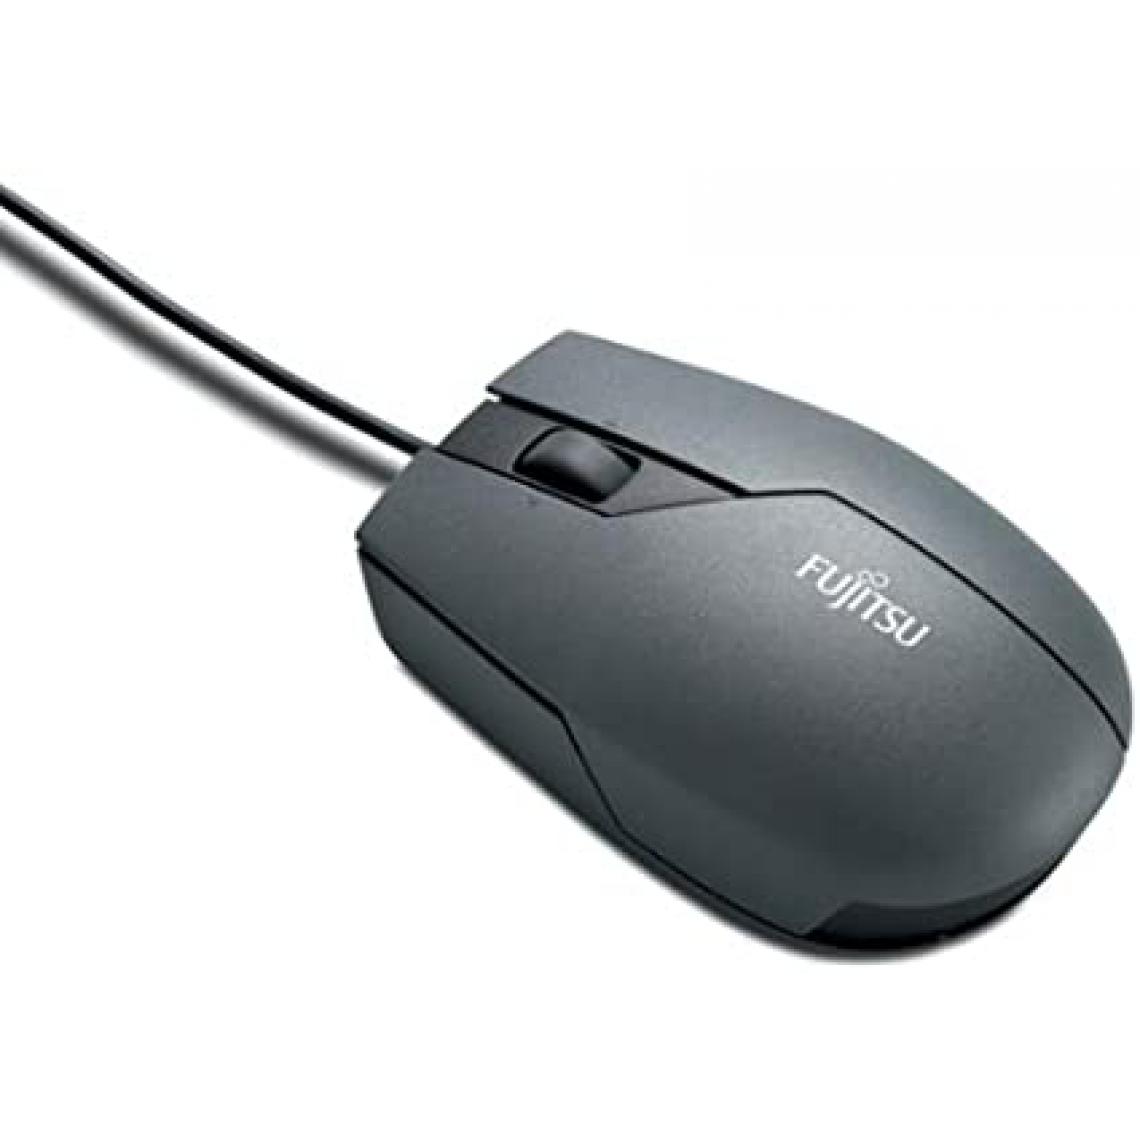 Fujitsu - Wireless Notebook Mouse WI660 Wireless Notebook Mouse WI660 Track on Glass sensor and silent keys - Souris